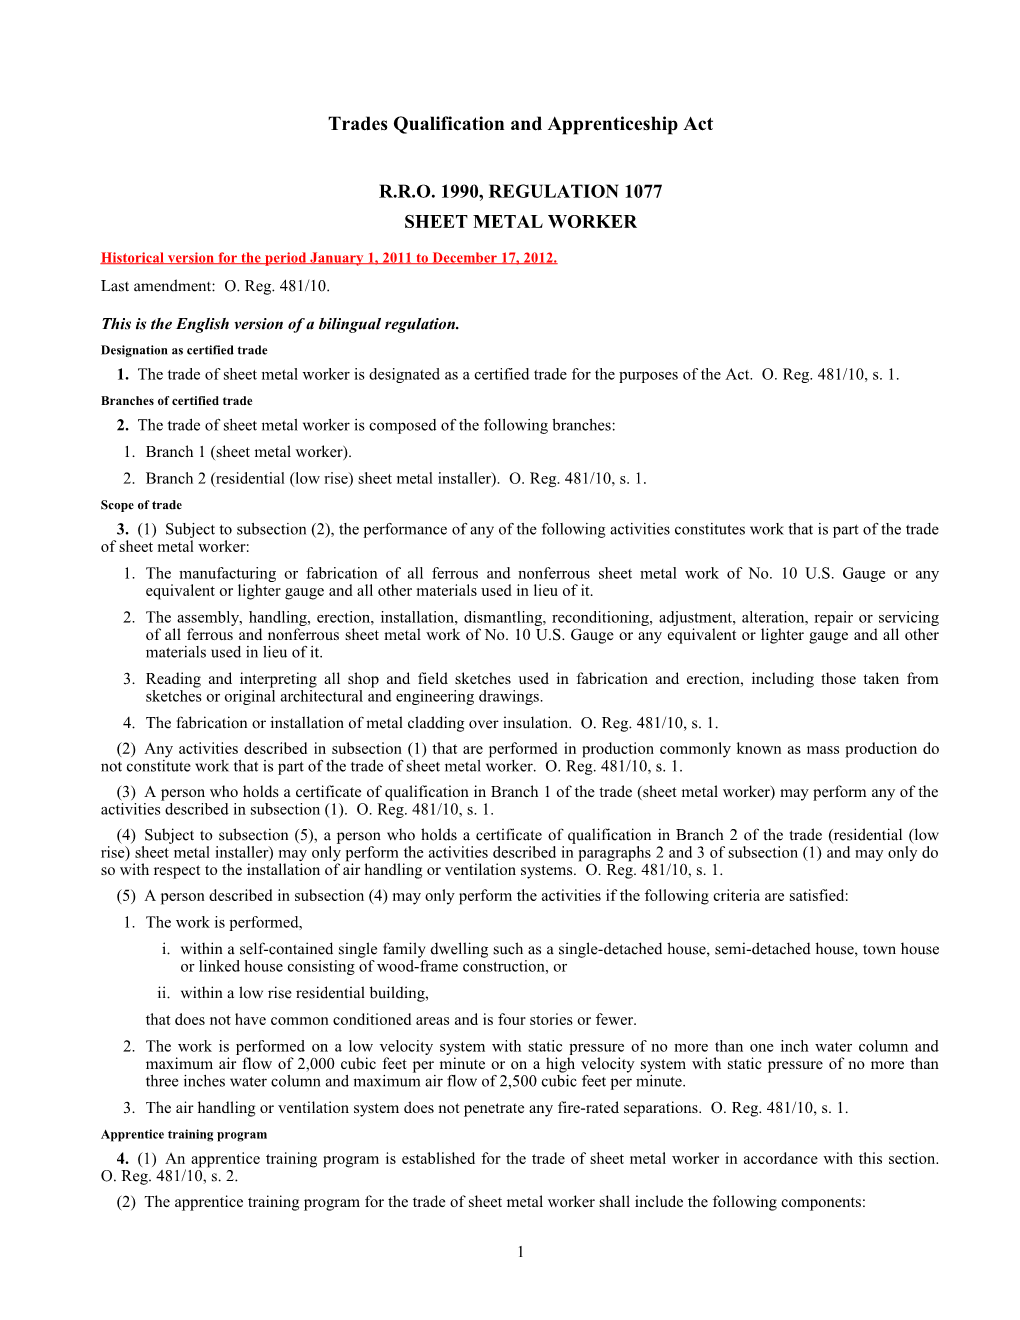 Trades Qualification and Apprenticeship Act - R.R.O. 1990, Reg. 1077